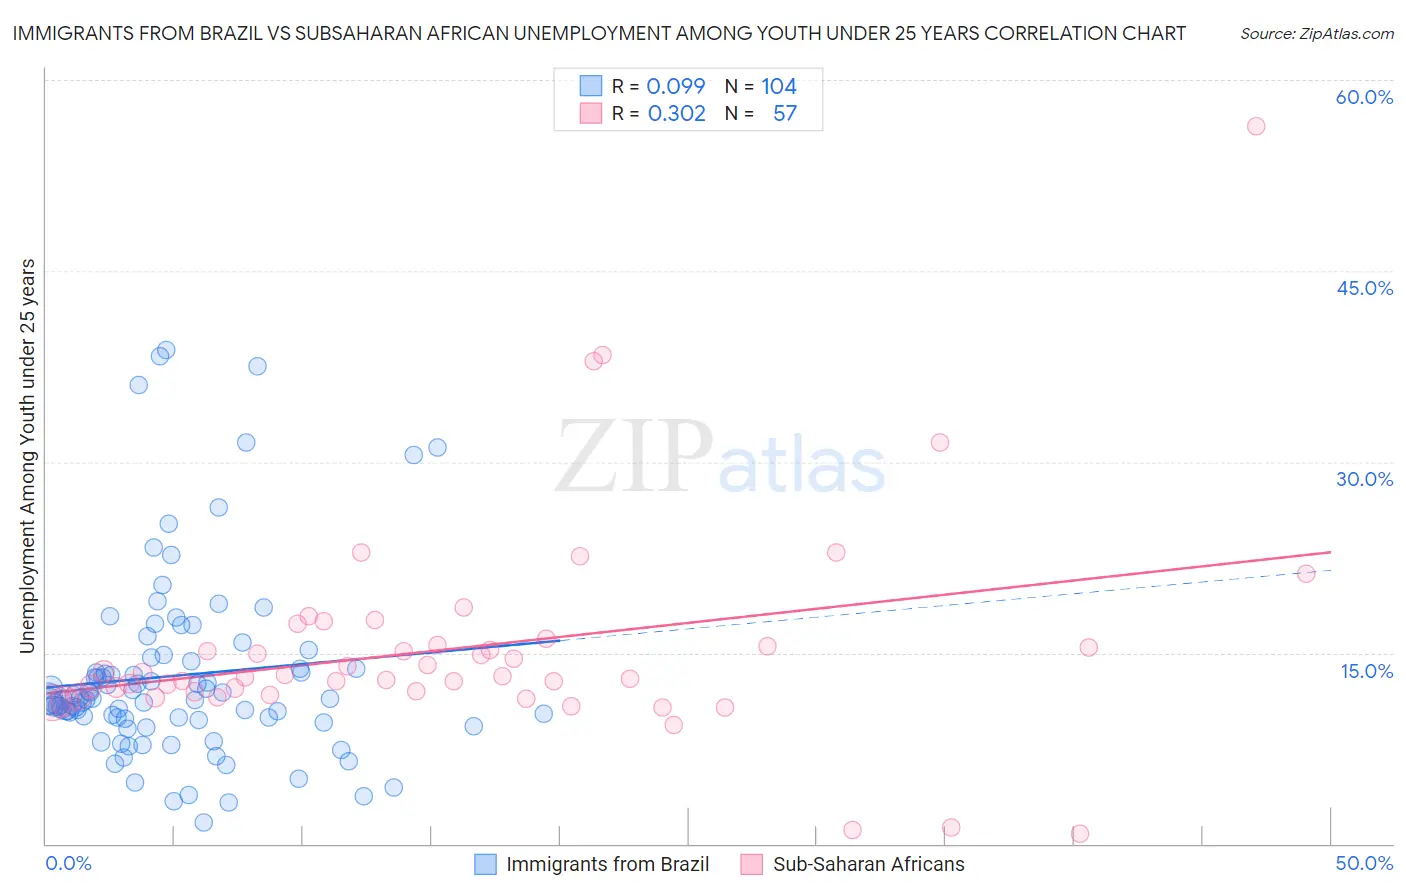 Immigrants from Brazil vs Subsaharan African Unemployment Among Youth under 25 years